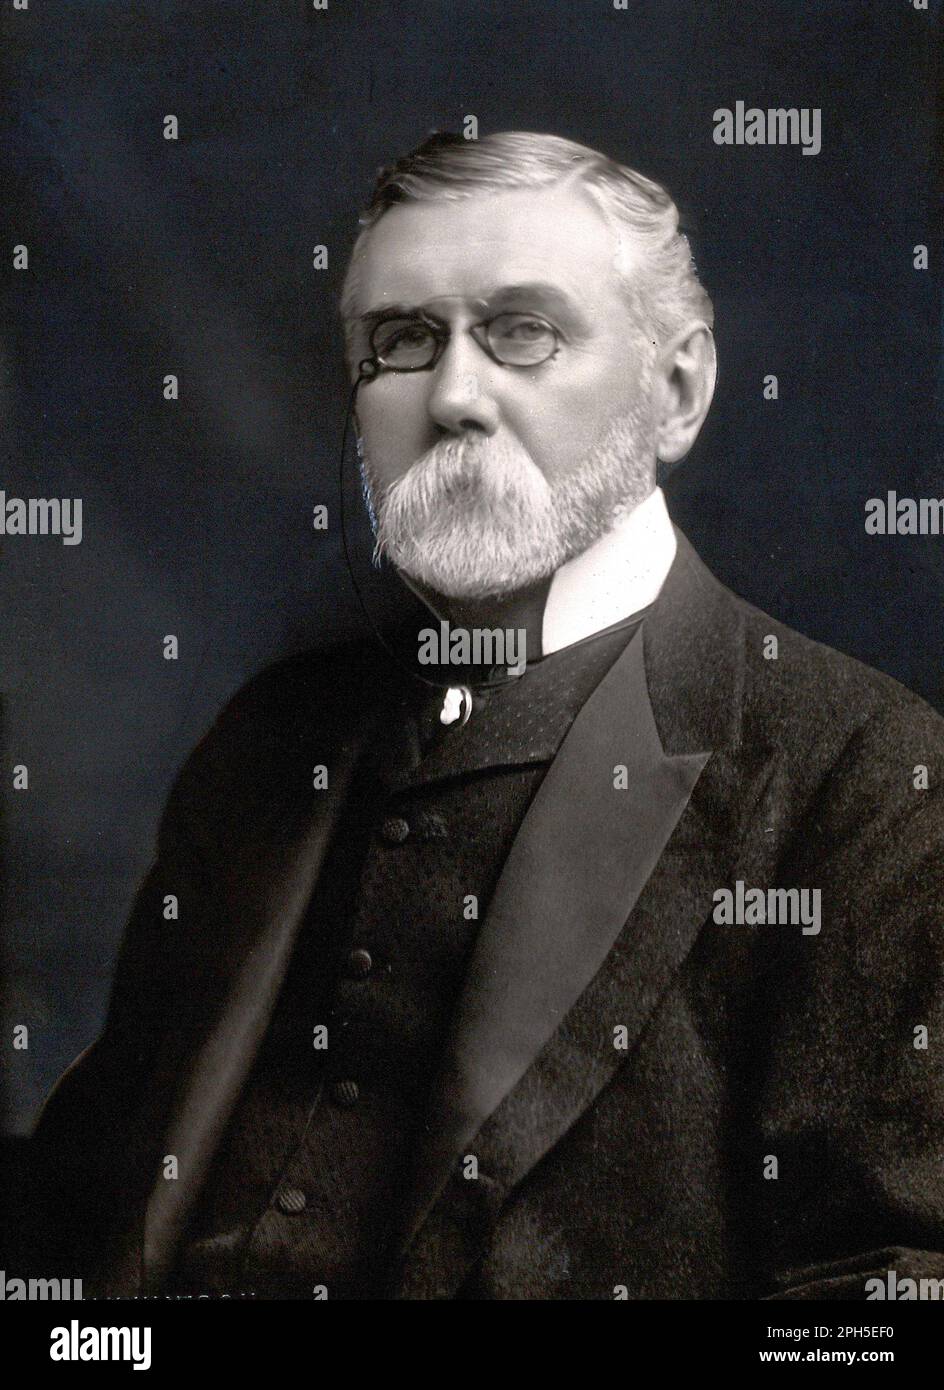 Sir John Halliday Croom portrait, 1847 – 1923, was a Scottish surgeon and medical author, vintage photograph from early 1900s Stock Photo